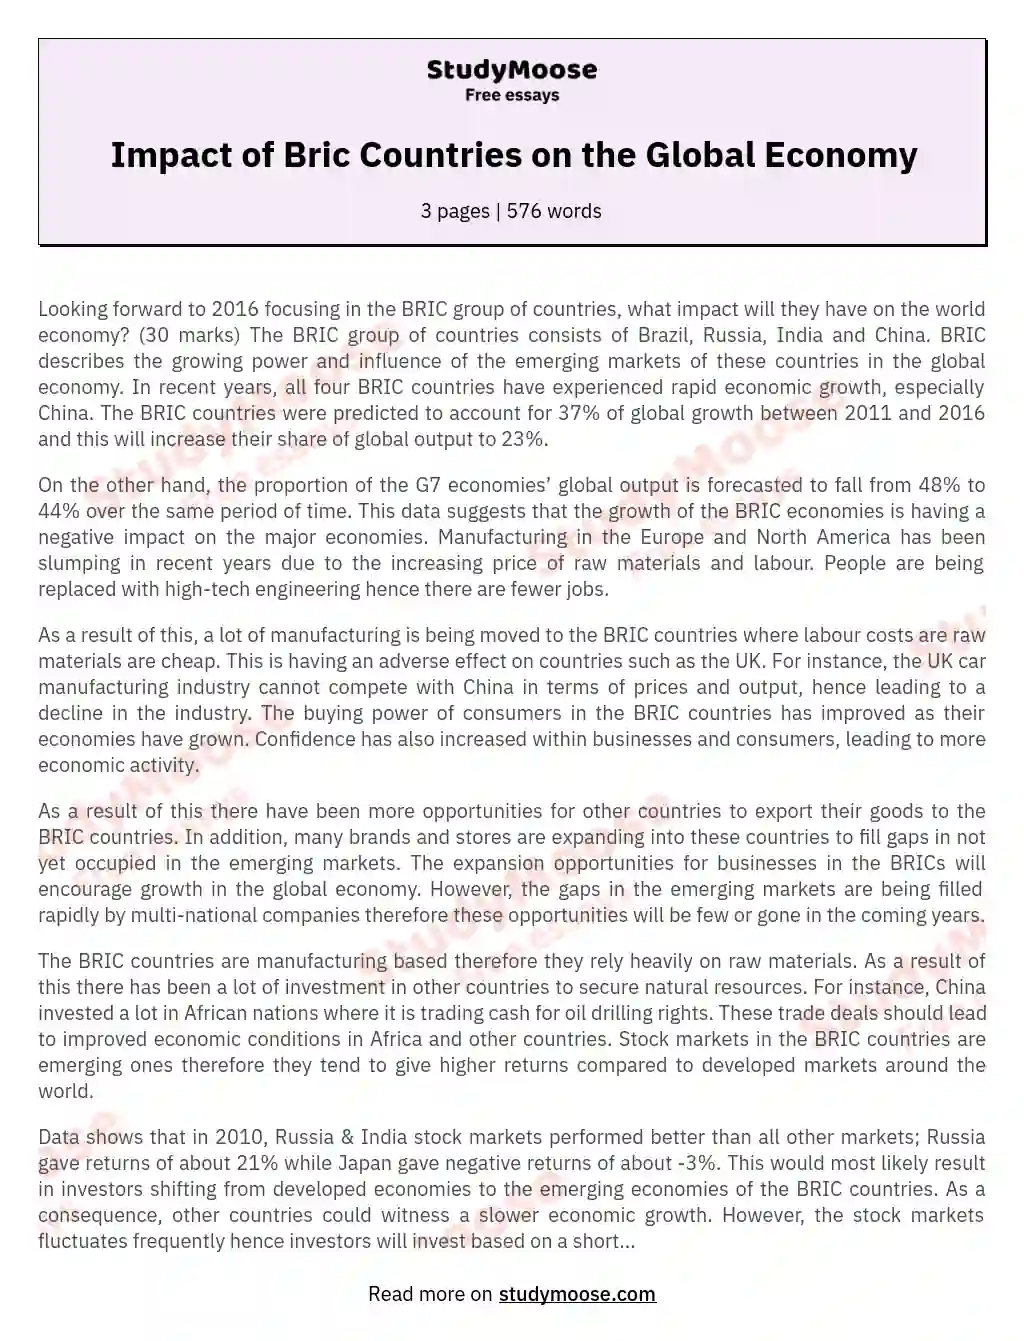 Impact of Bric Countries on the Global Economy